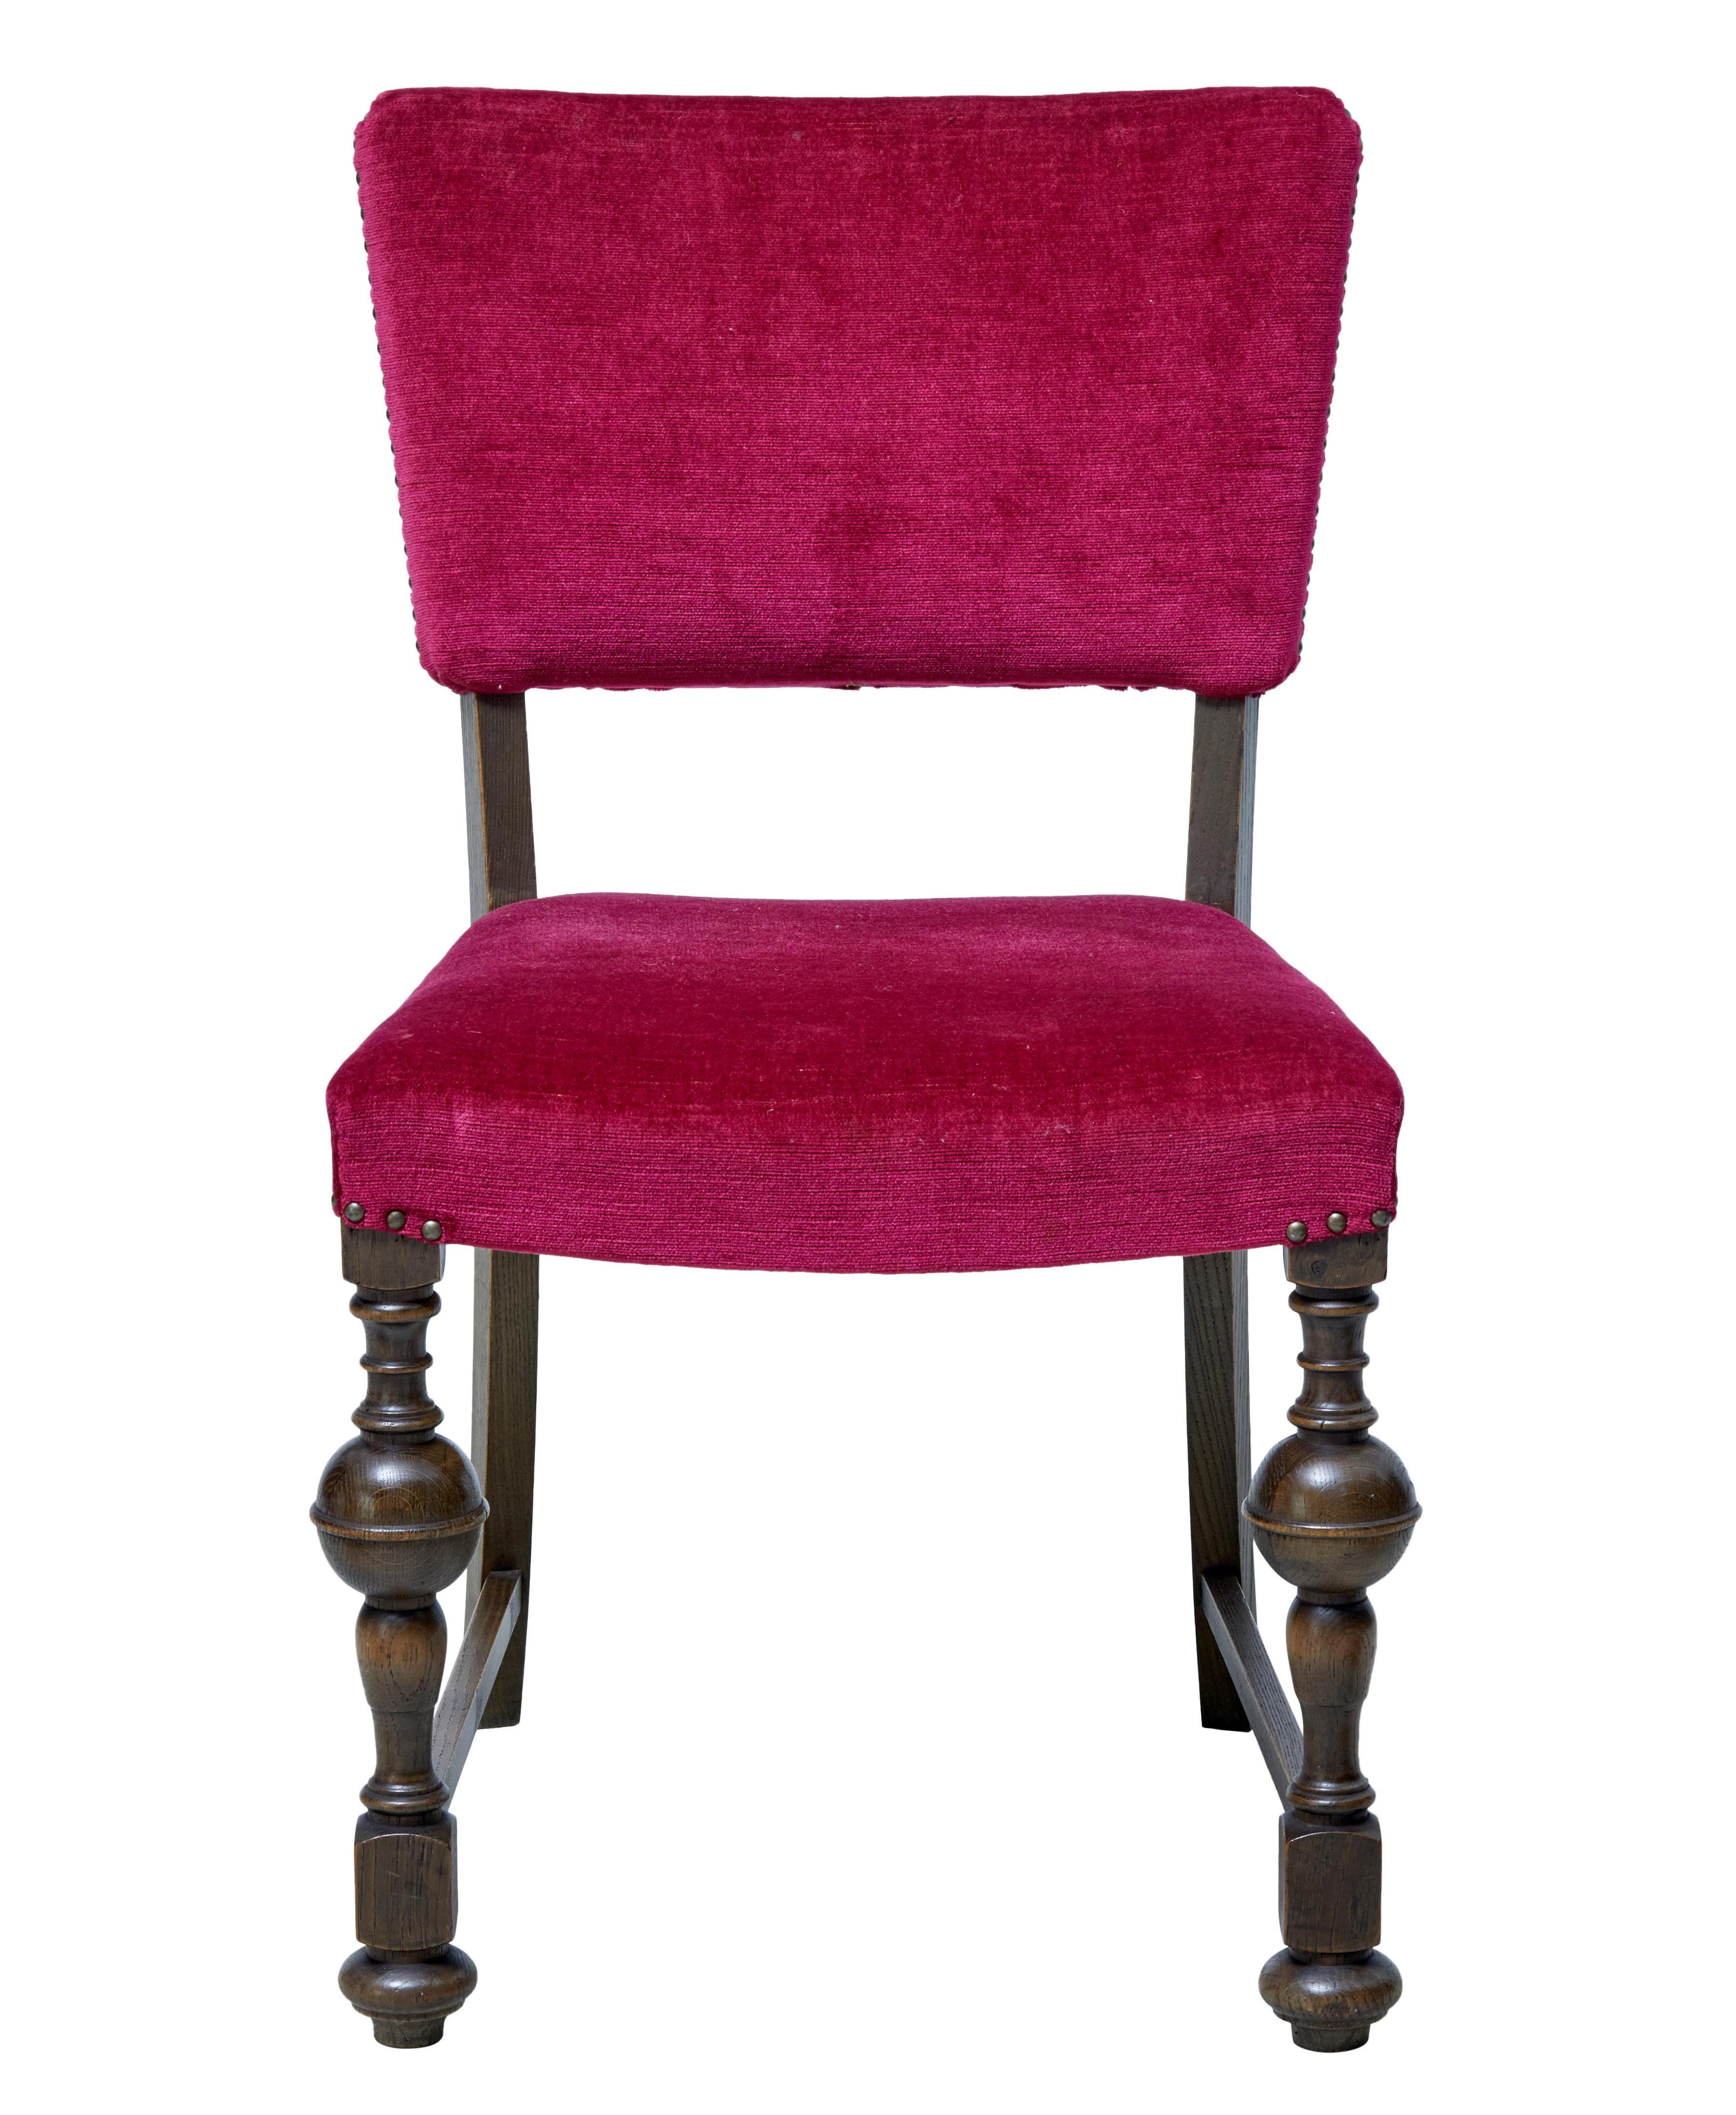 Striking set of 12 near pink upholstered dining chairs, circa 1920.

Later covered in a cerise pink faux velvet covering. Shaped backs and over stuffed seats. Turned front legs united by stretcher to the back tapering leg.

Expected wear and